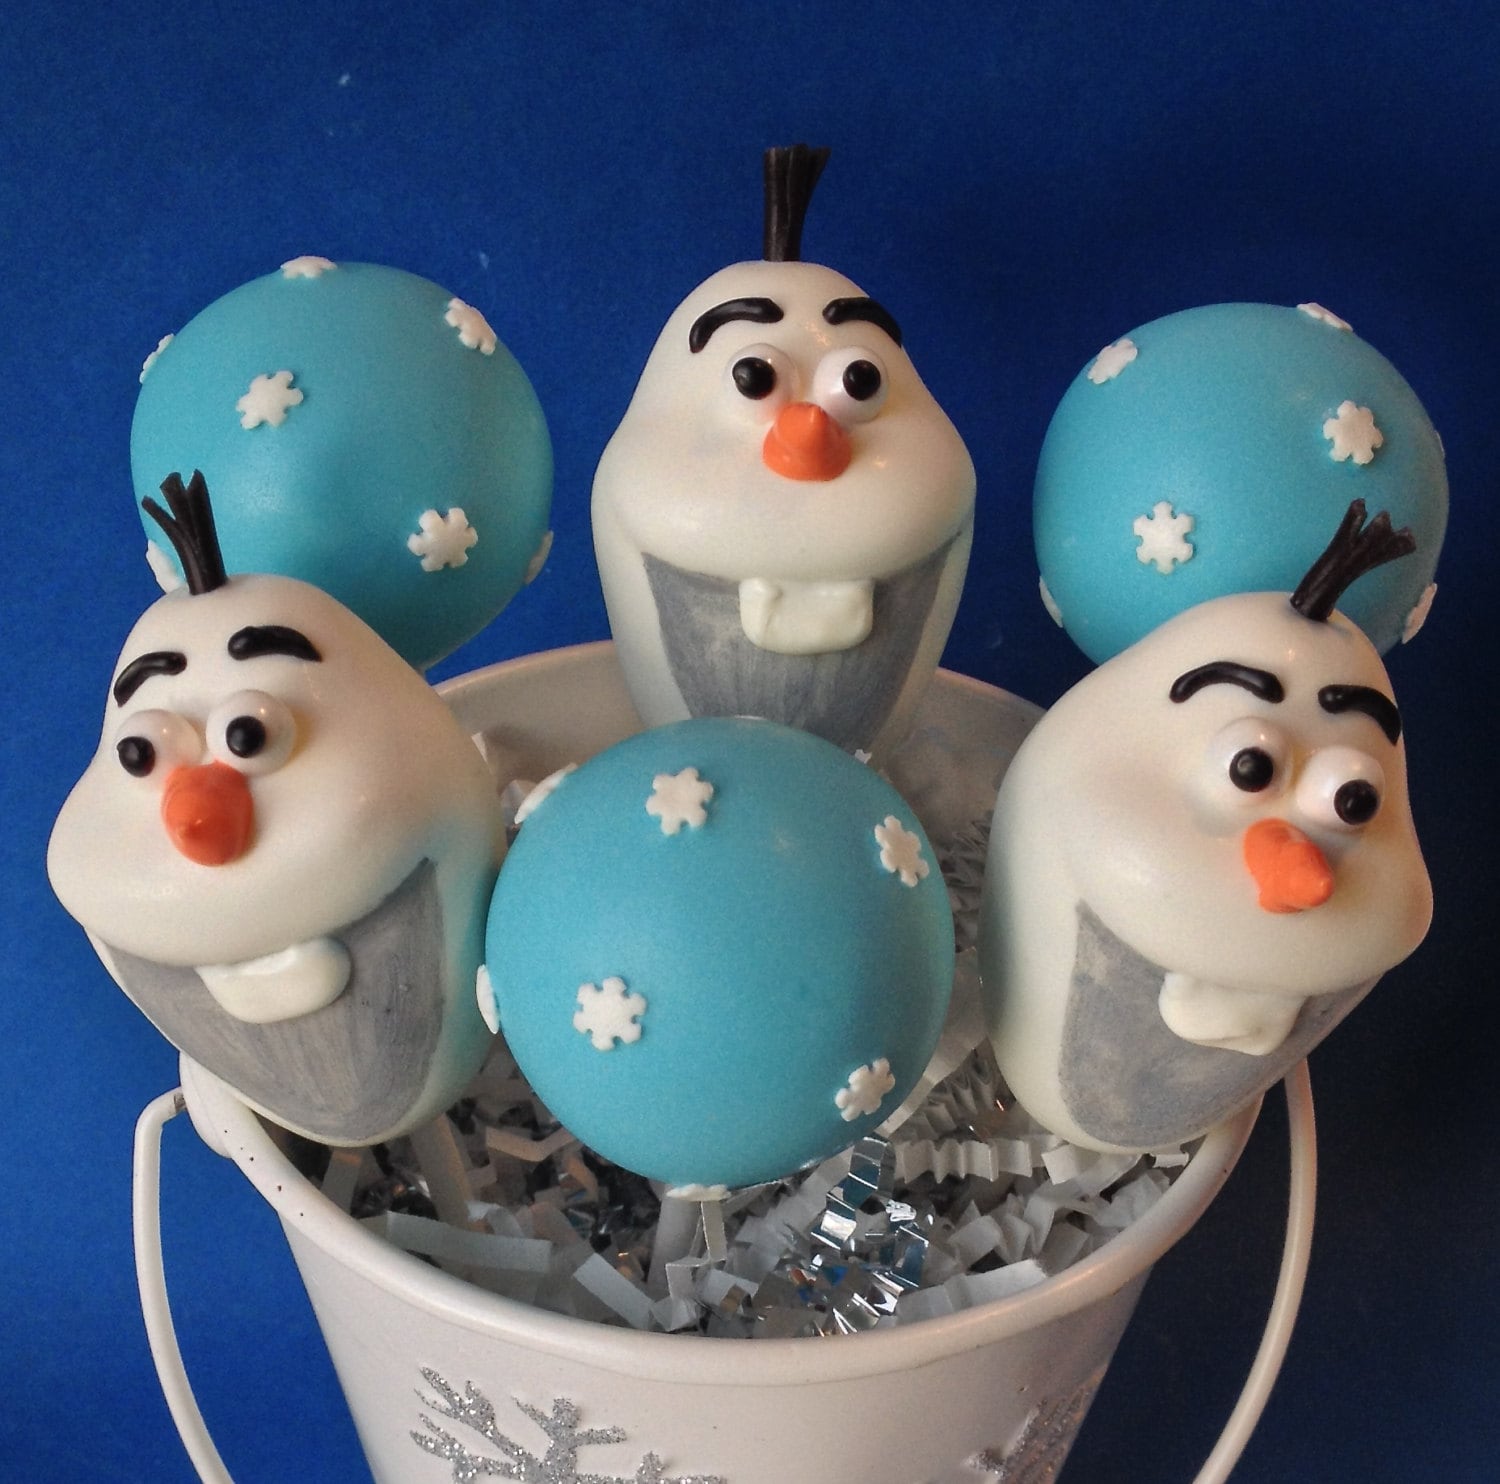 12 Snowman and Snowflake Cake Pops for snow party favors